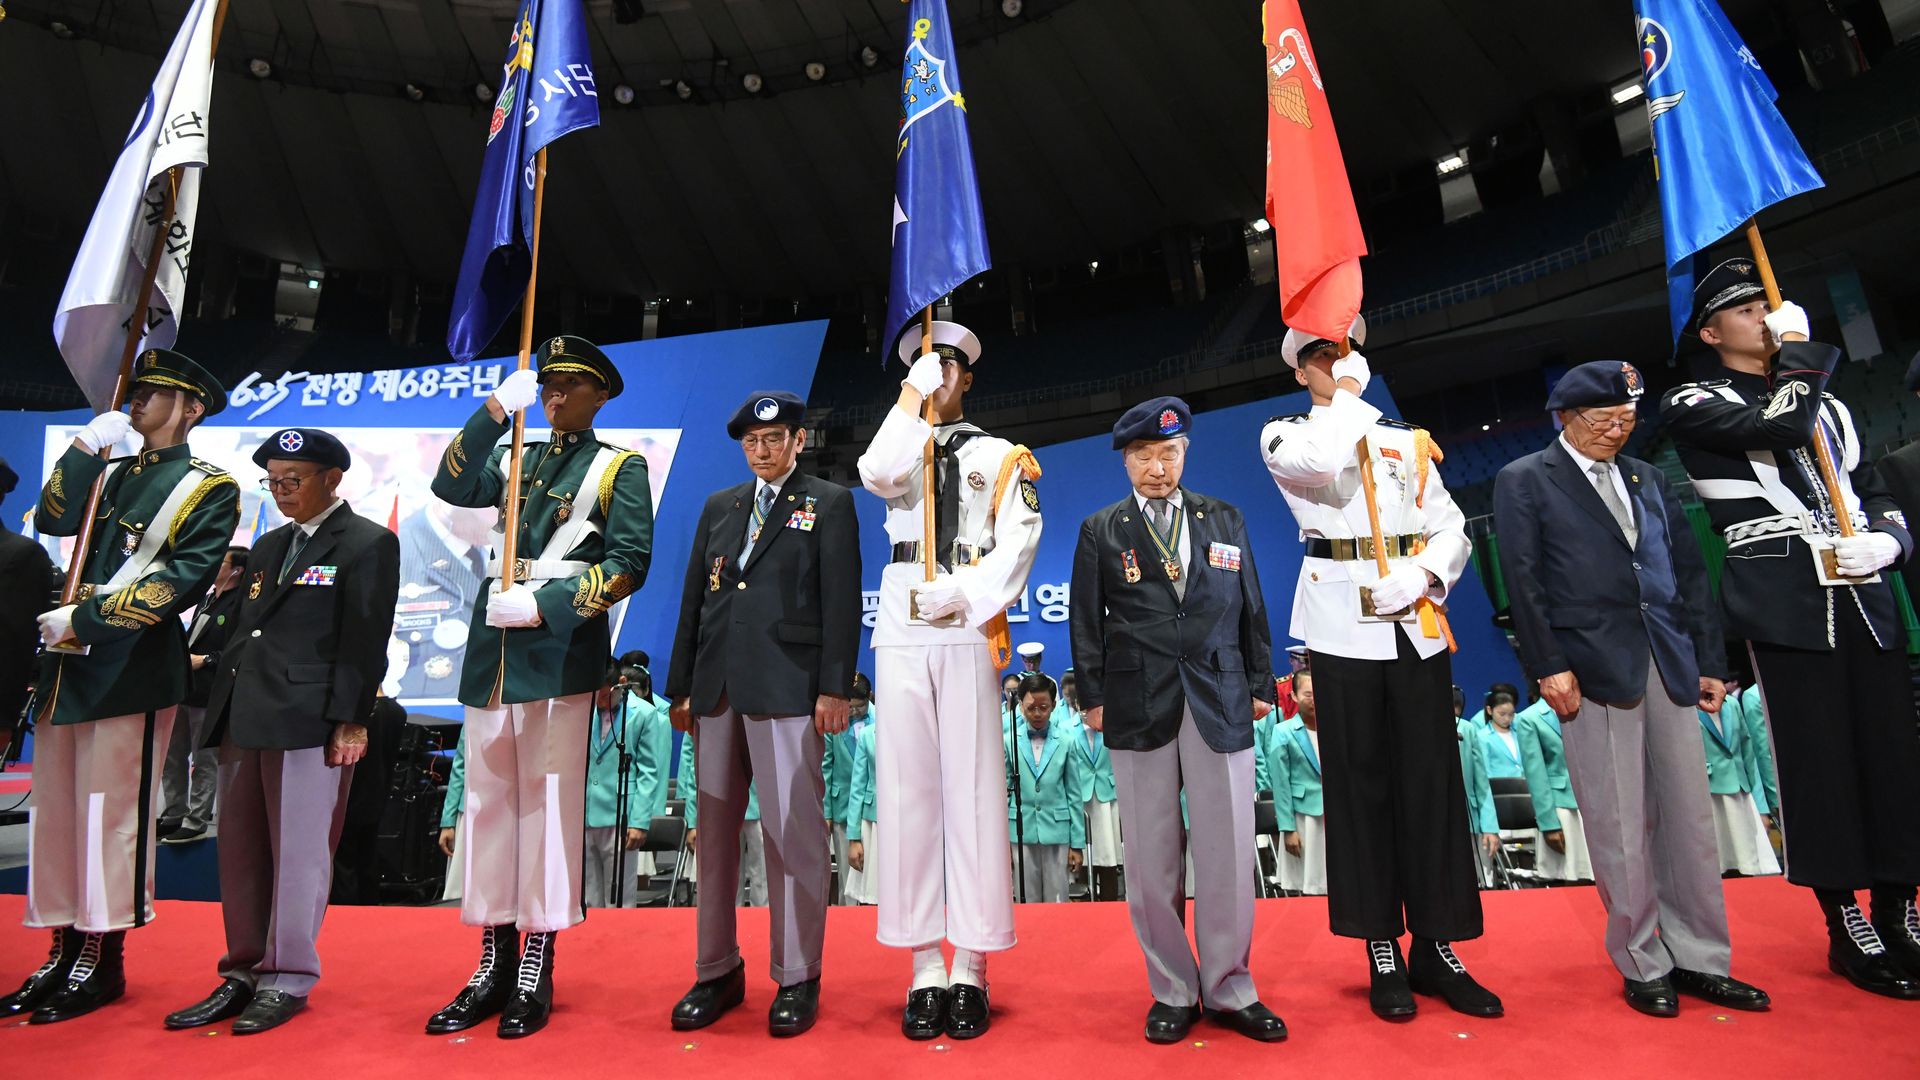 South Korean war veterans pay silent tribute during a ceremony marking the 68th anniversary of the outbreak of the Korean War in Seoul on June 25, 2018.